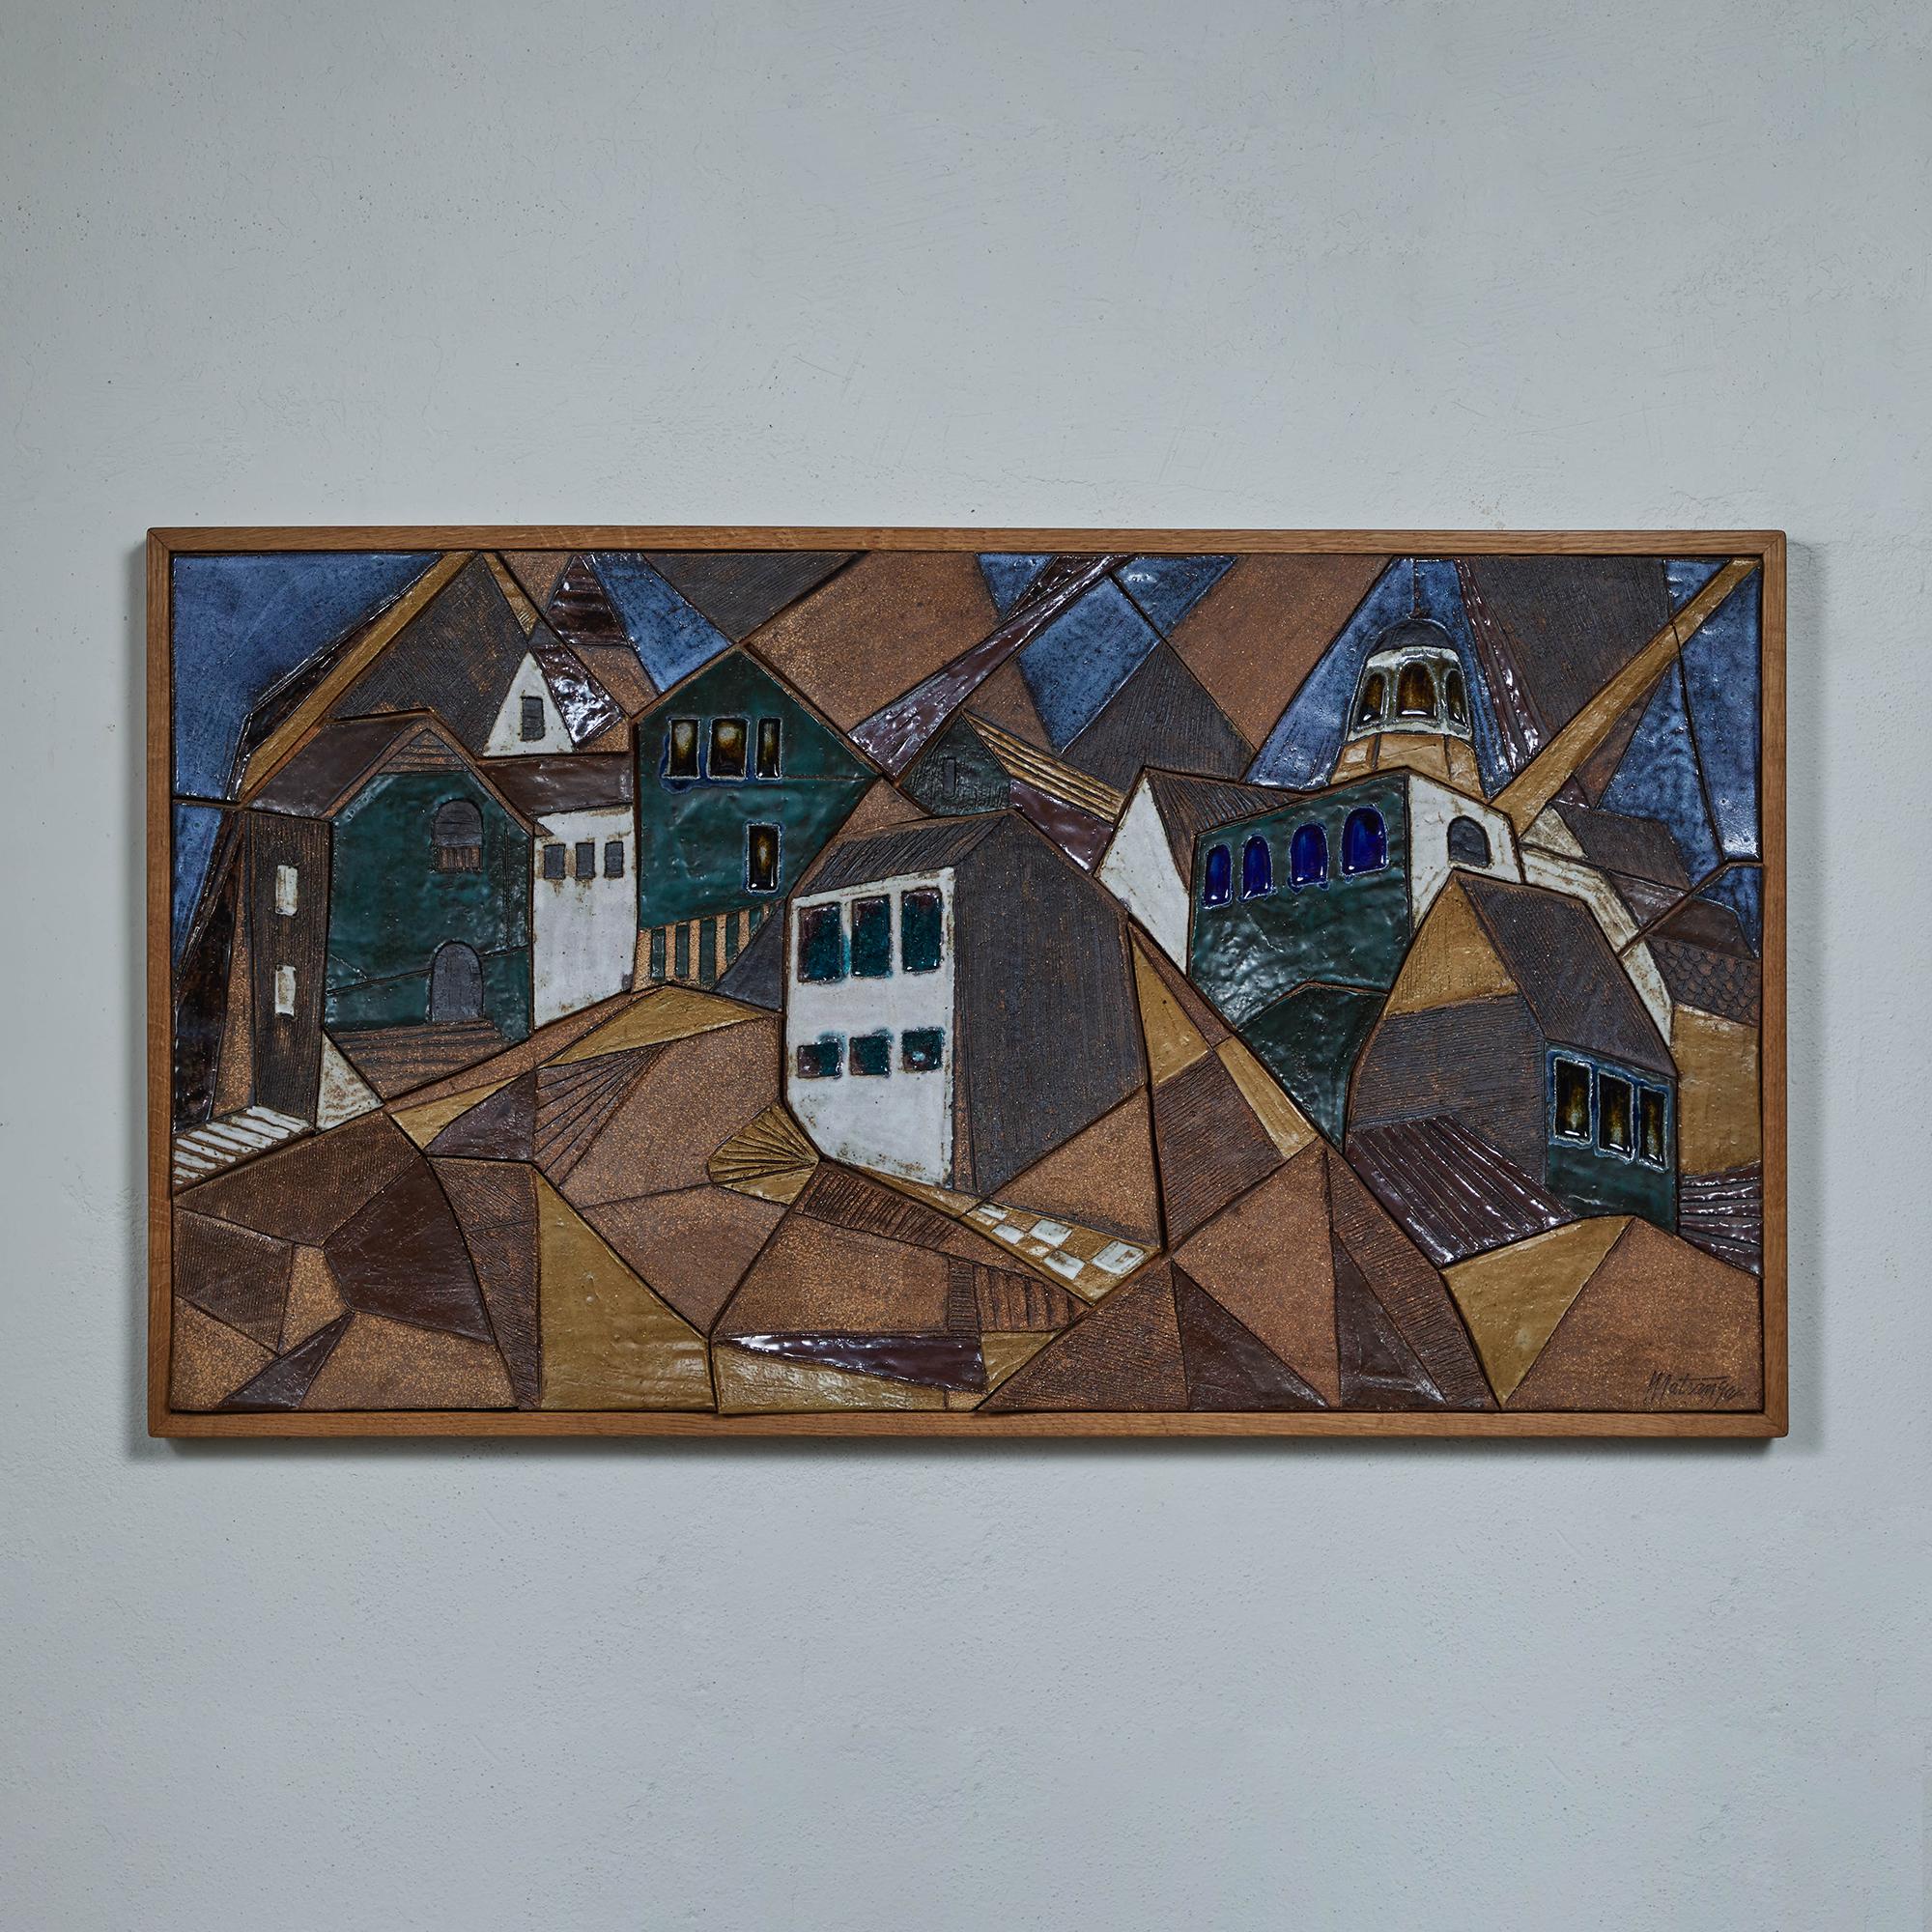 Mosaic tile art piece by California ceramicist Frank Matranga, c.1960s, USA. This piece is composed of varying shaped glazed ceramic tiles to create a mosaic cityscape. The colors range from blue to green, and neutral brown tones and set in a wood